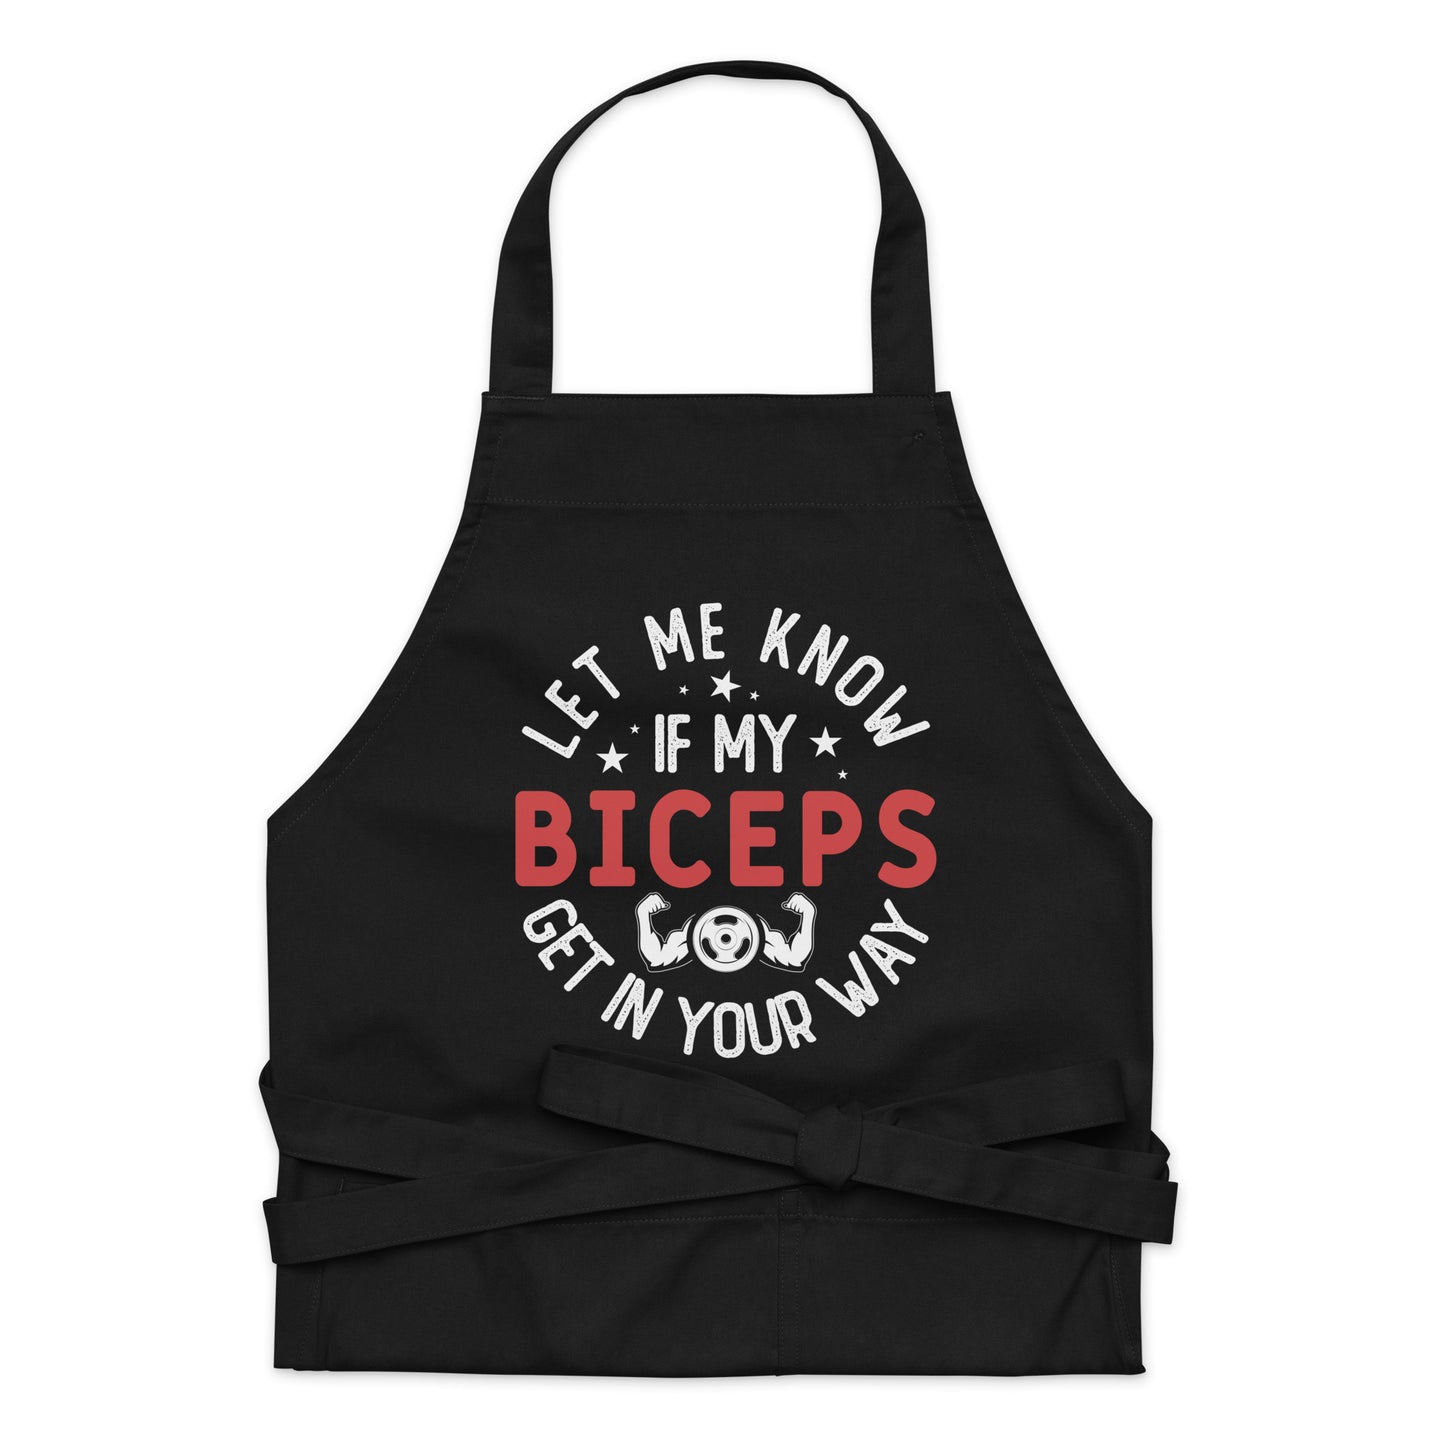 Let Me Know if My Biceps Get in Your Way Organic cotton apron